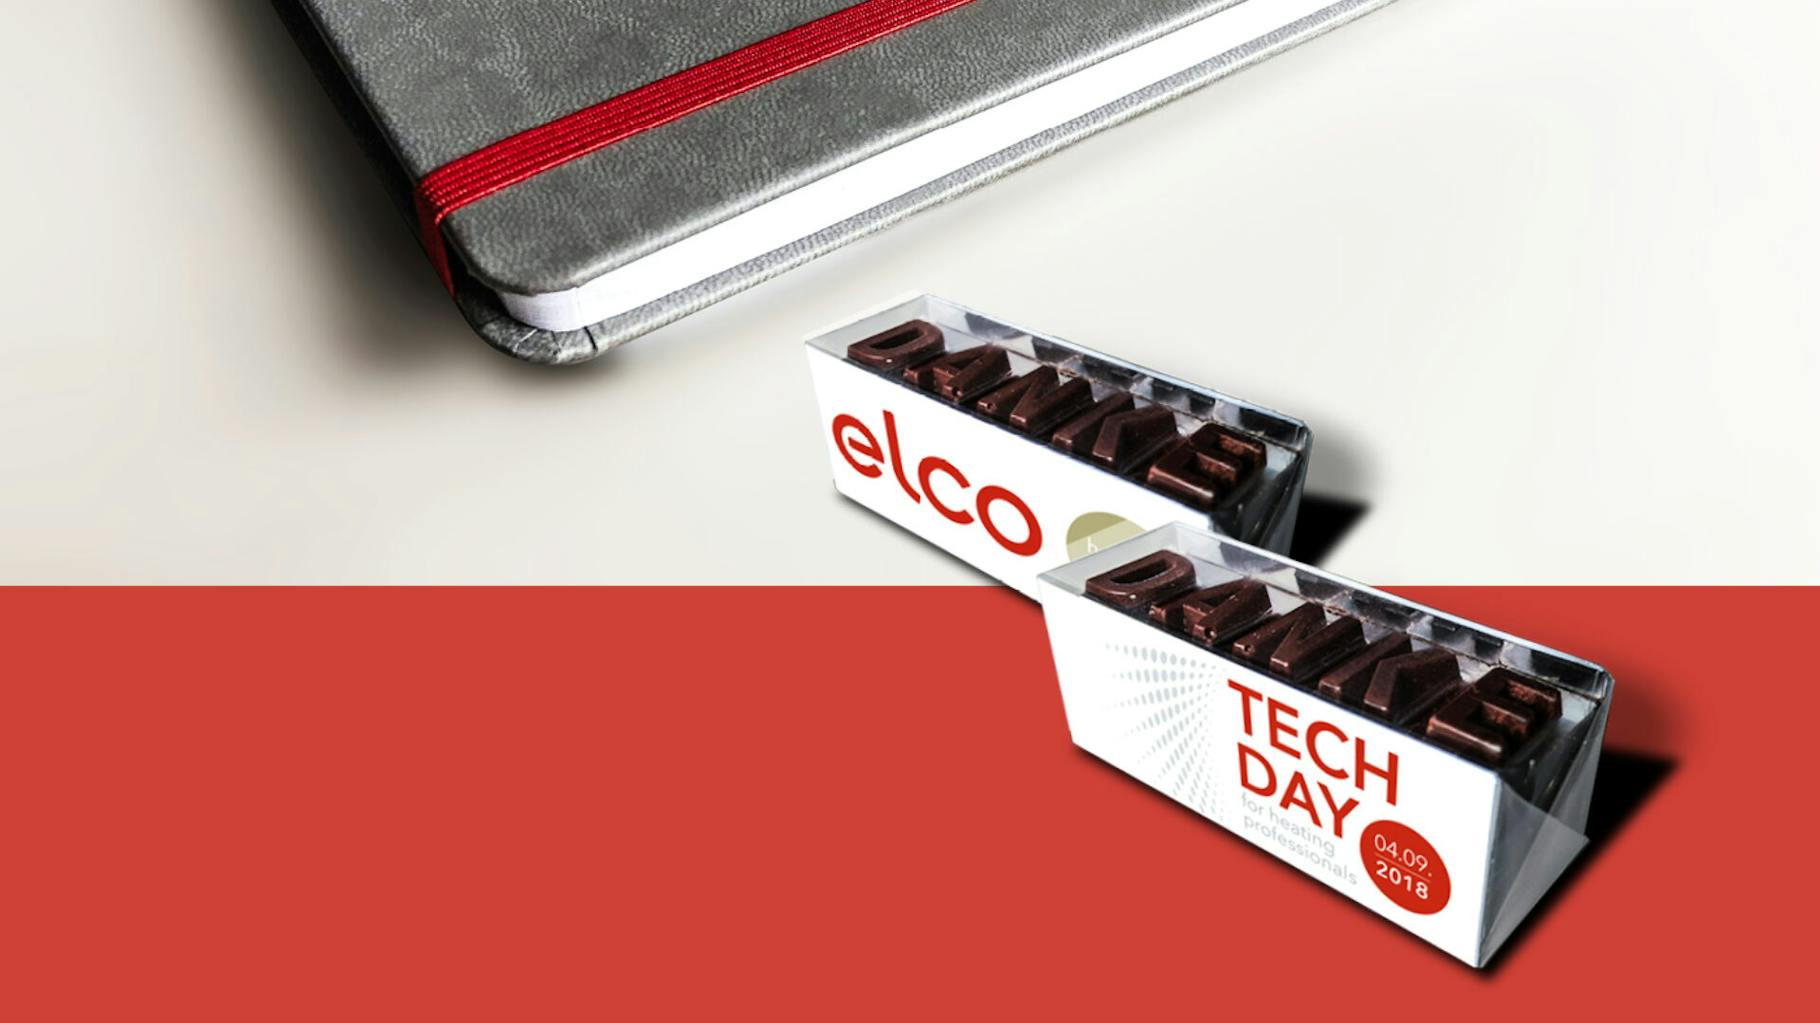 A notebook and chocolate with the ELCO logo as PR event giveaways  